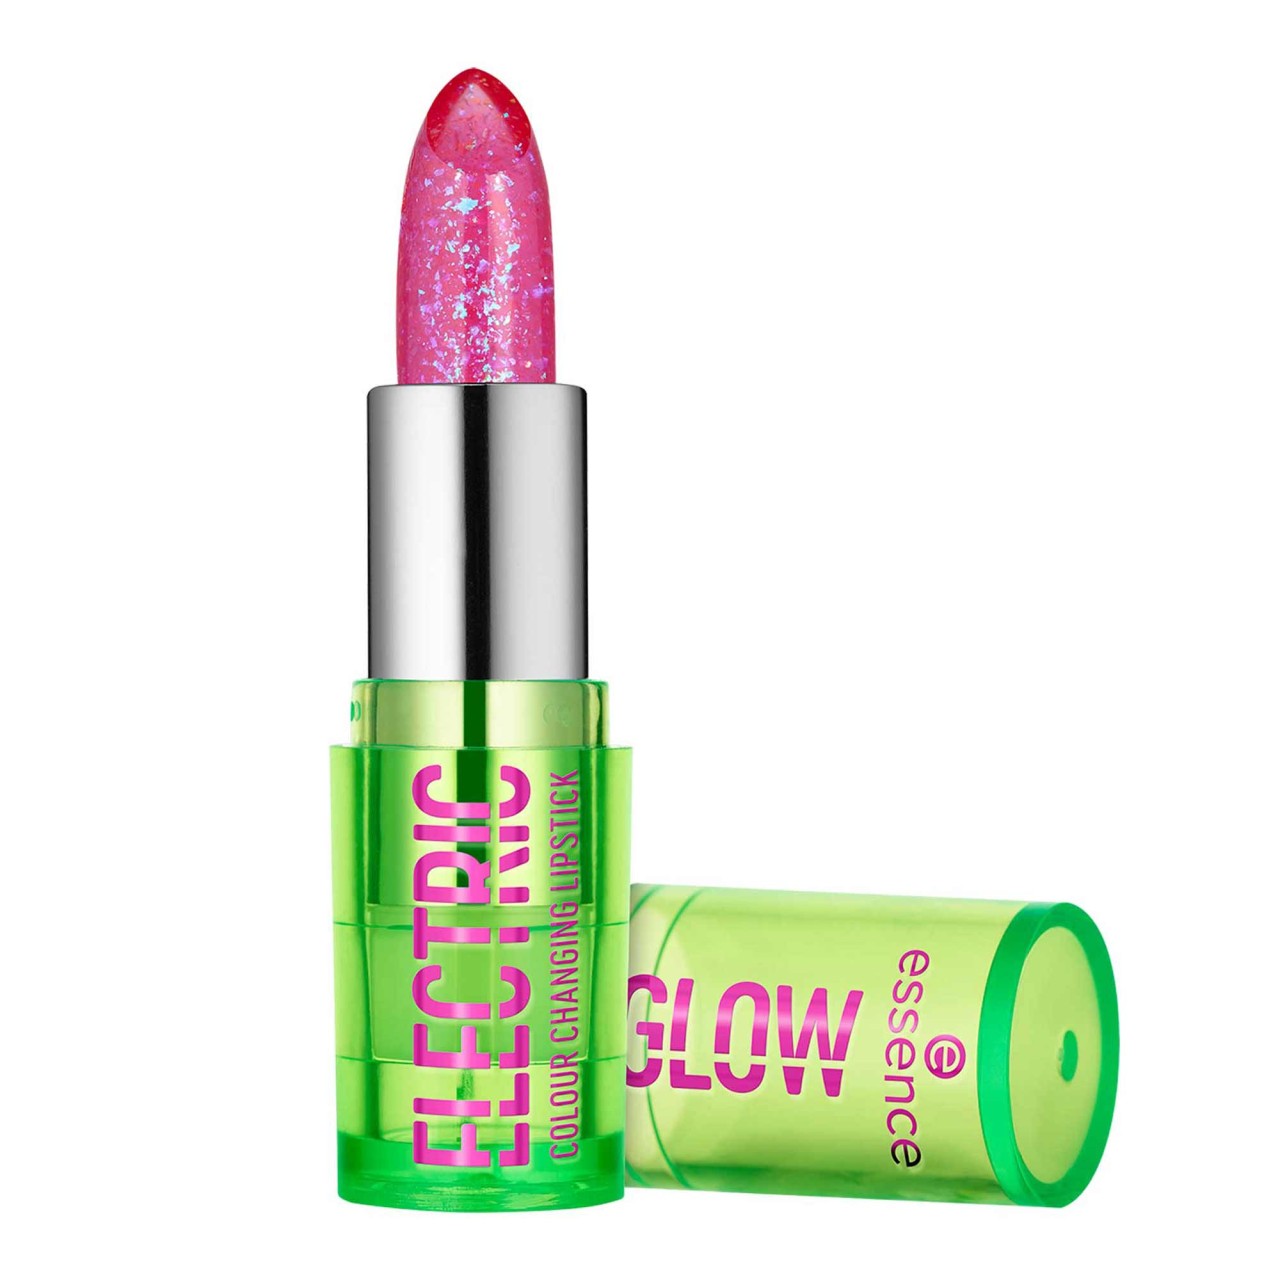 ESSENCE - Electric Glow Colour Changing Lipstick - 